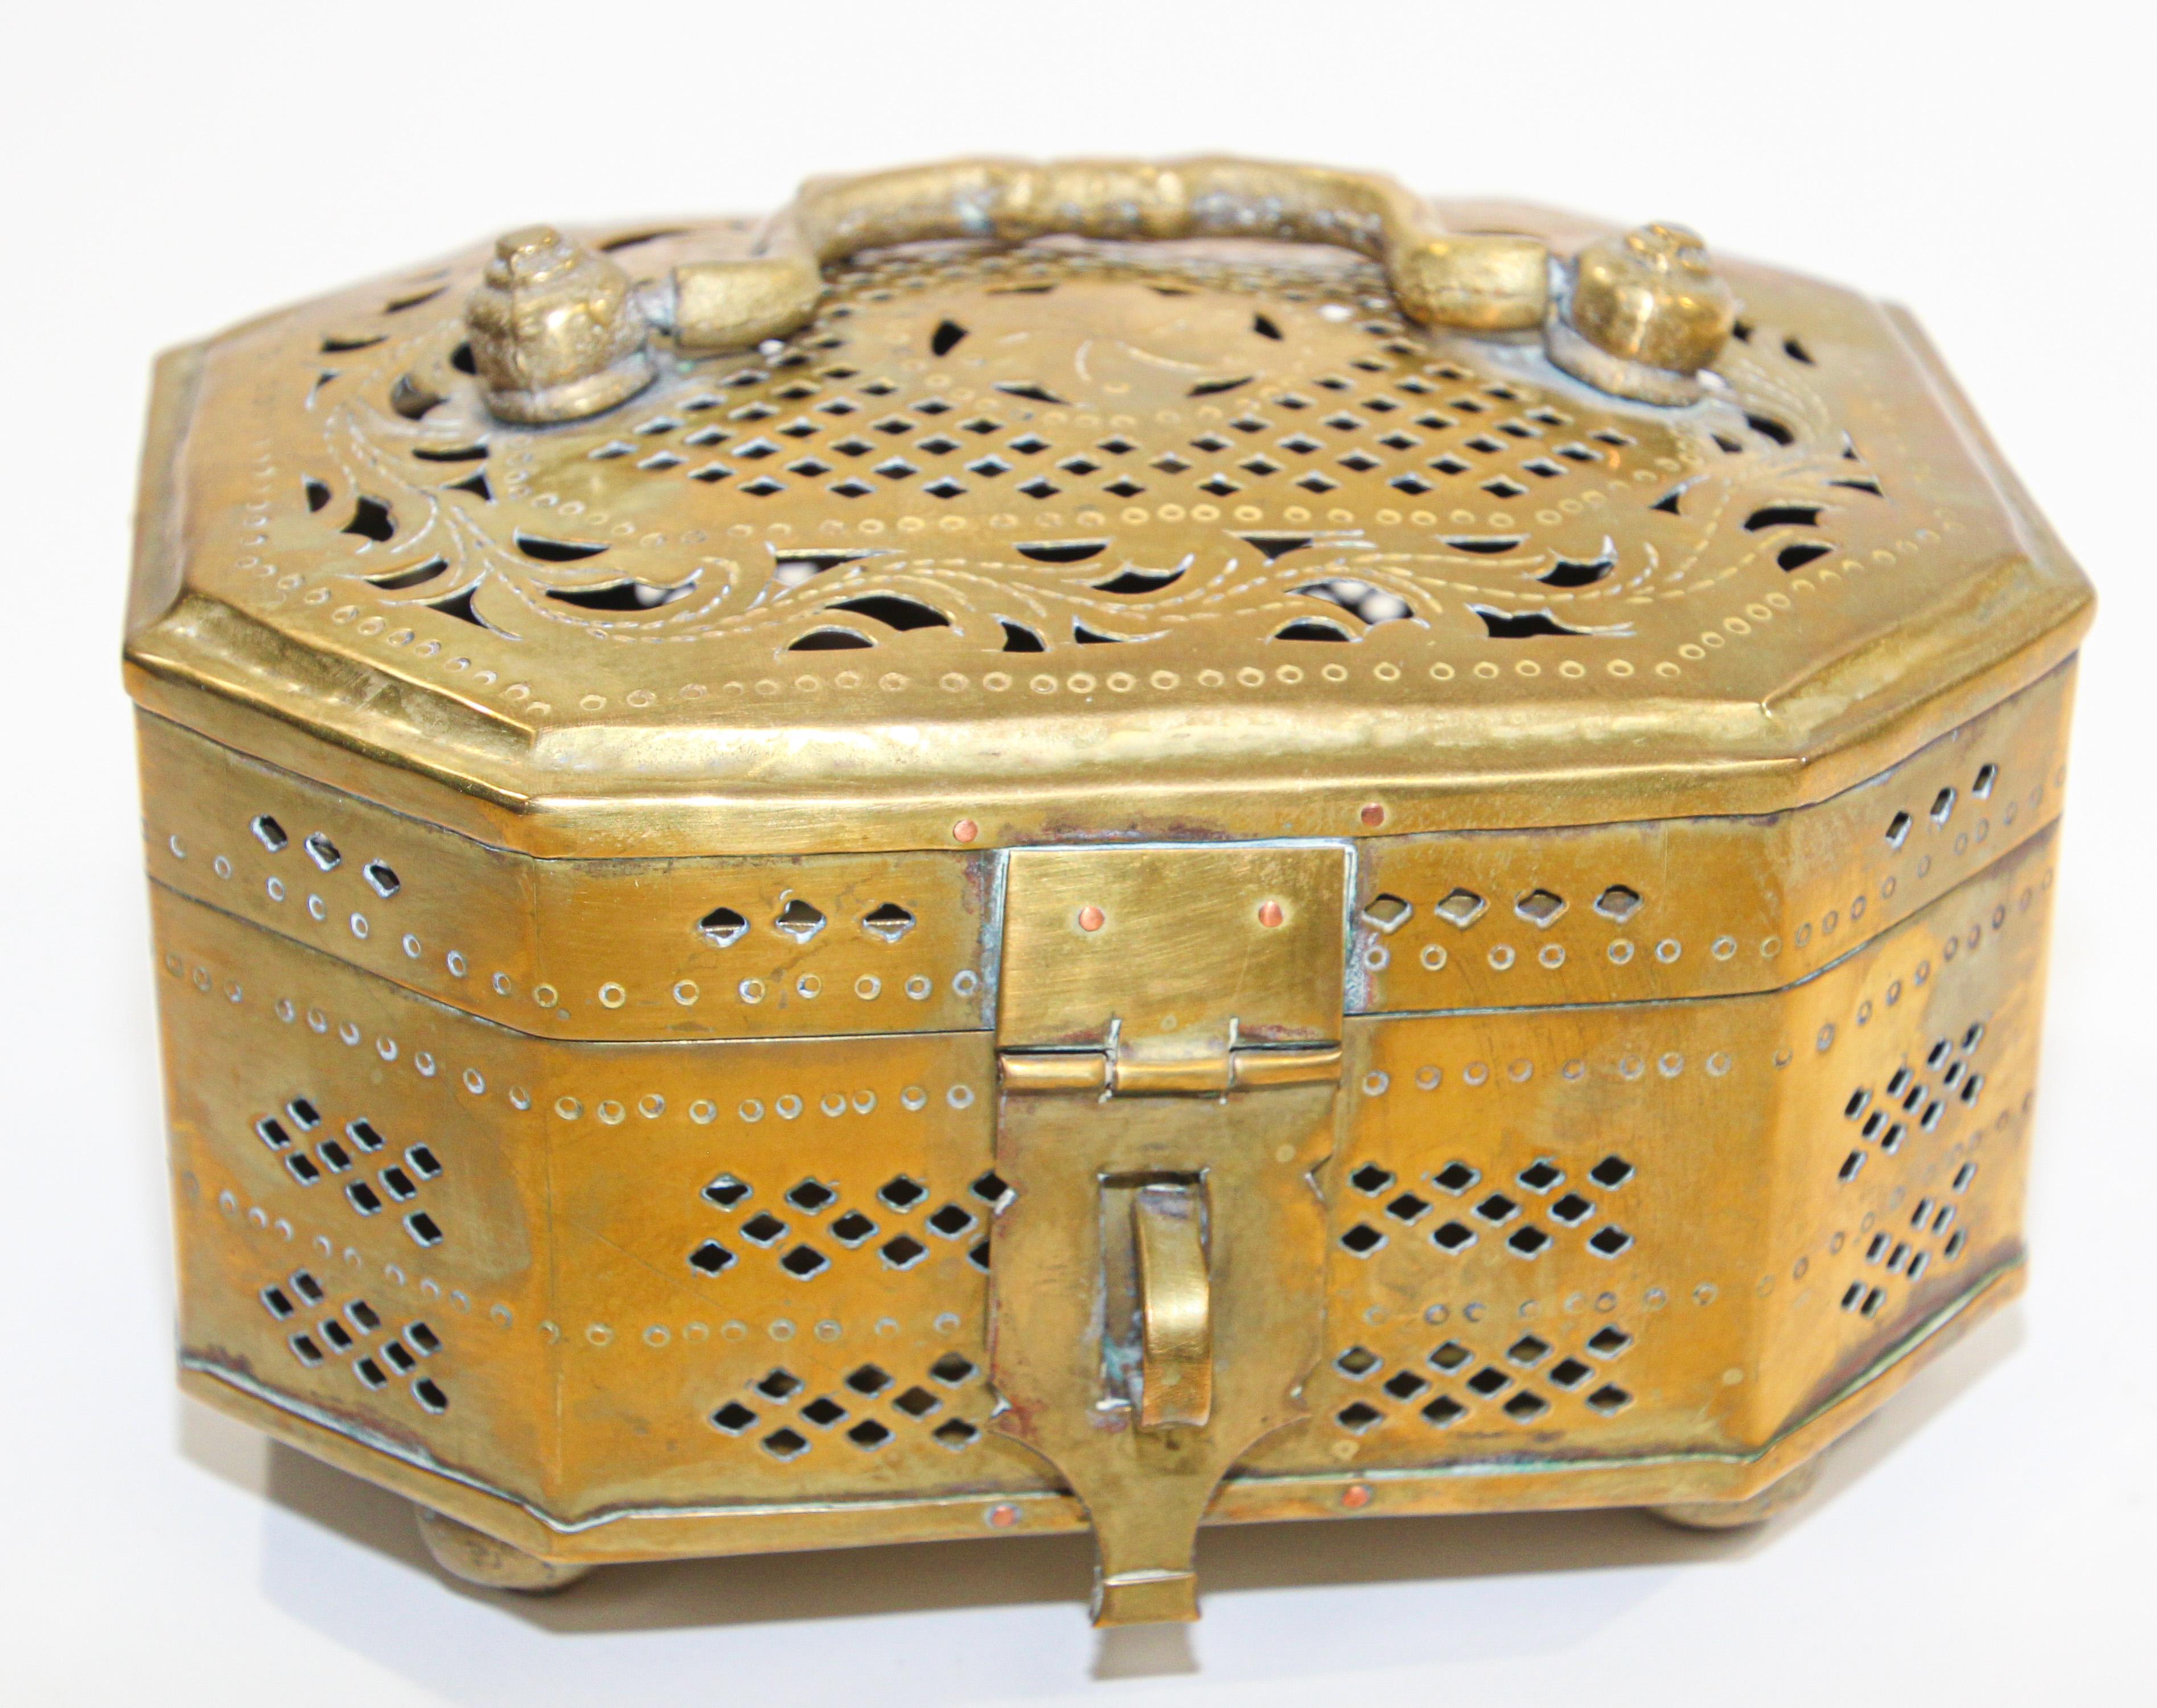 Beautiful hand-crafted polished brass footed box with with lid, latch and handle intricately hand-hammered with geometric designs and pierced with holes. 
Vintage pierced decorative Mughal Indian style brass box from India, used to burn incense.